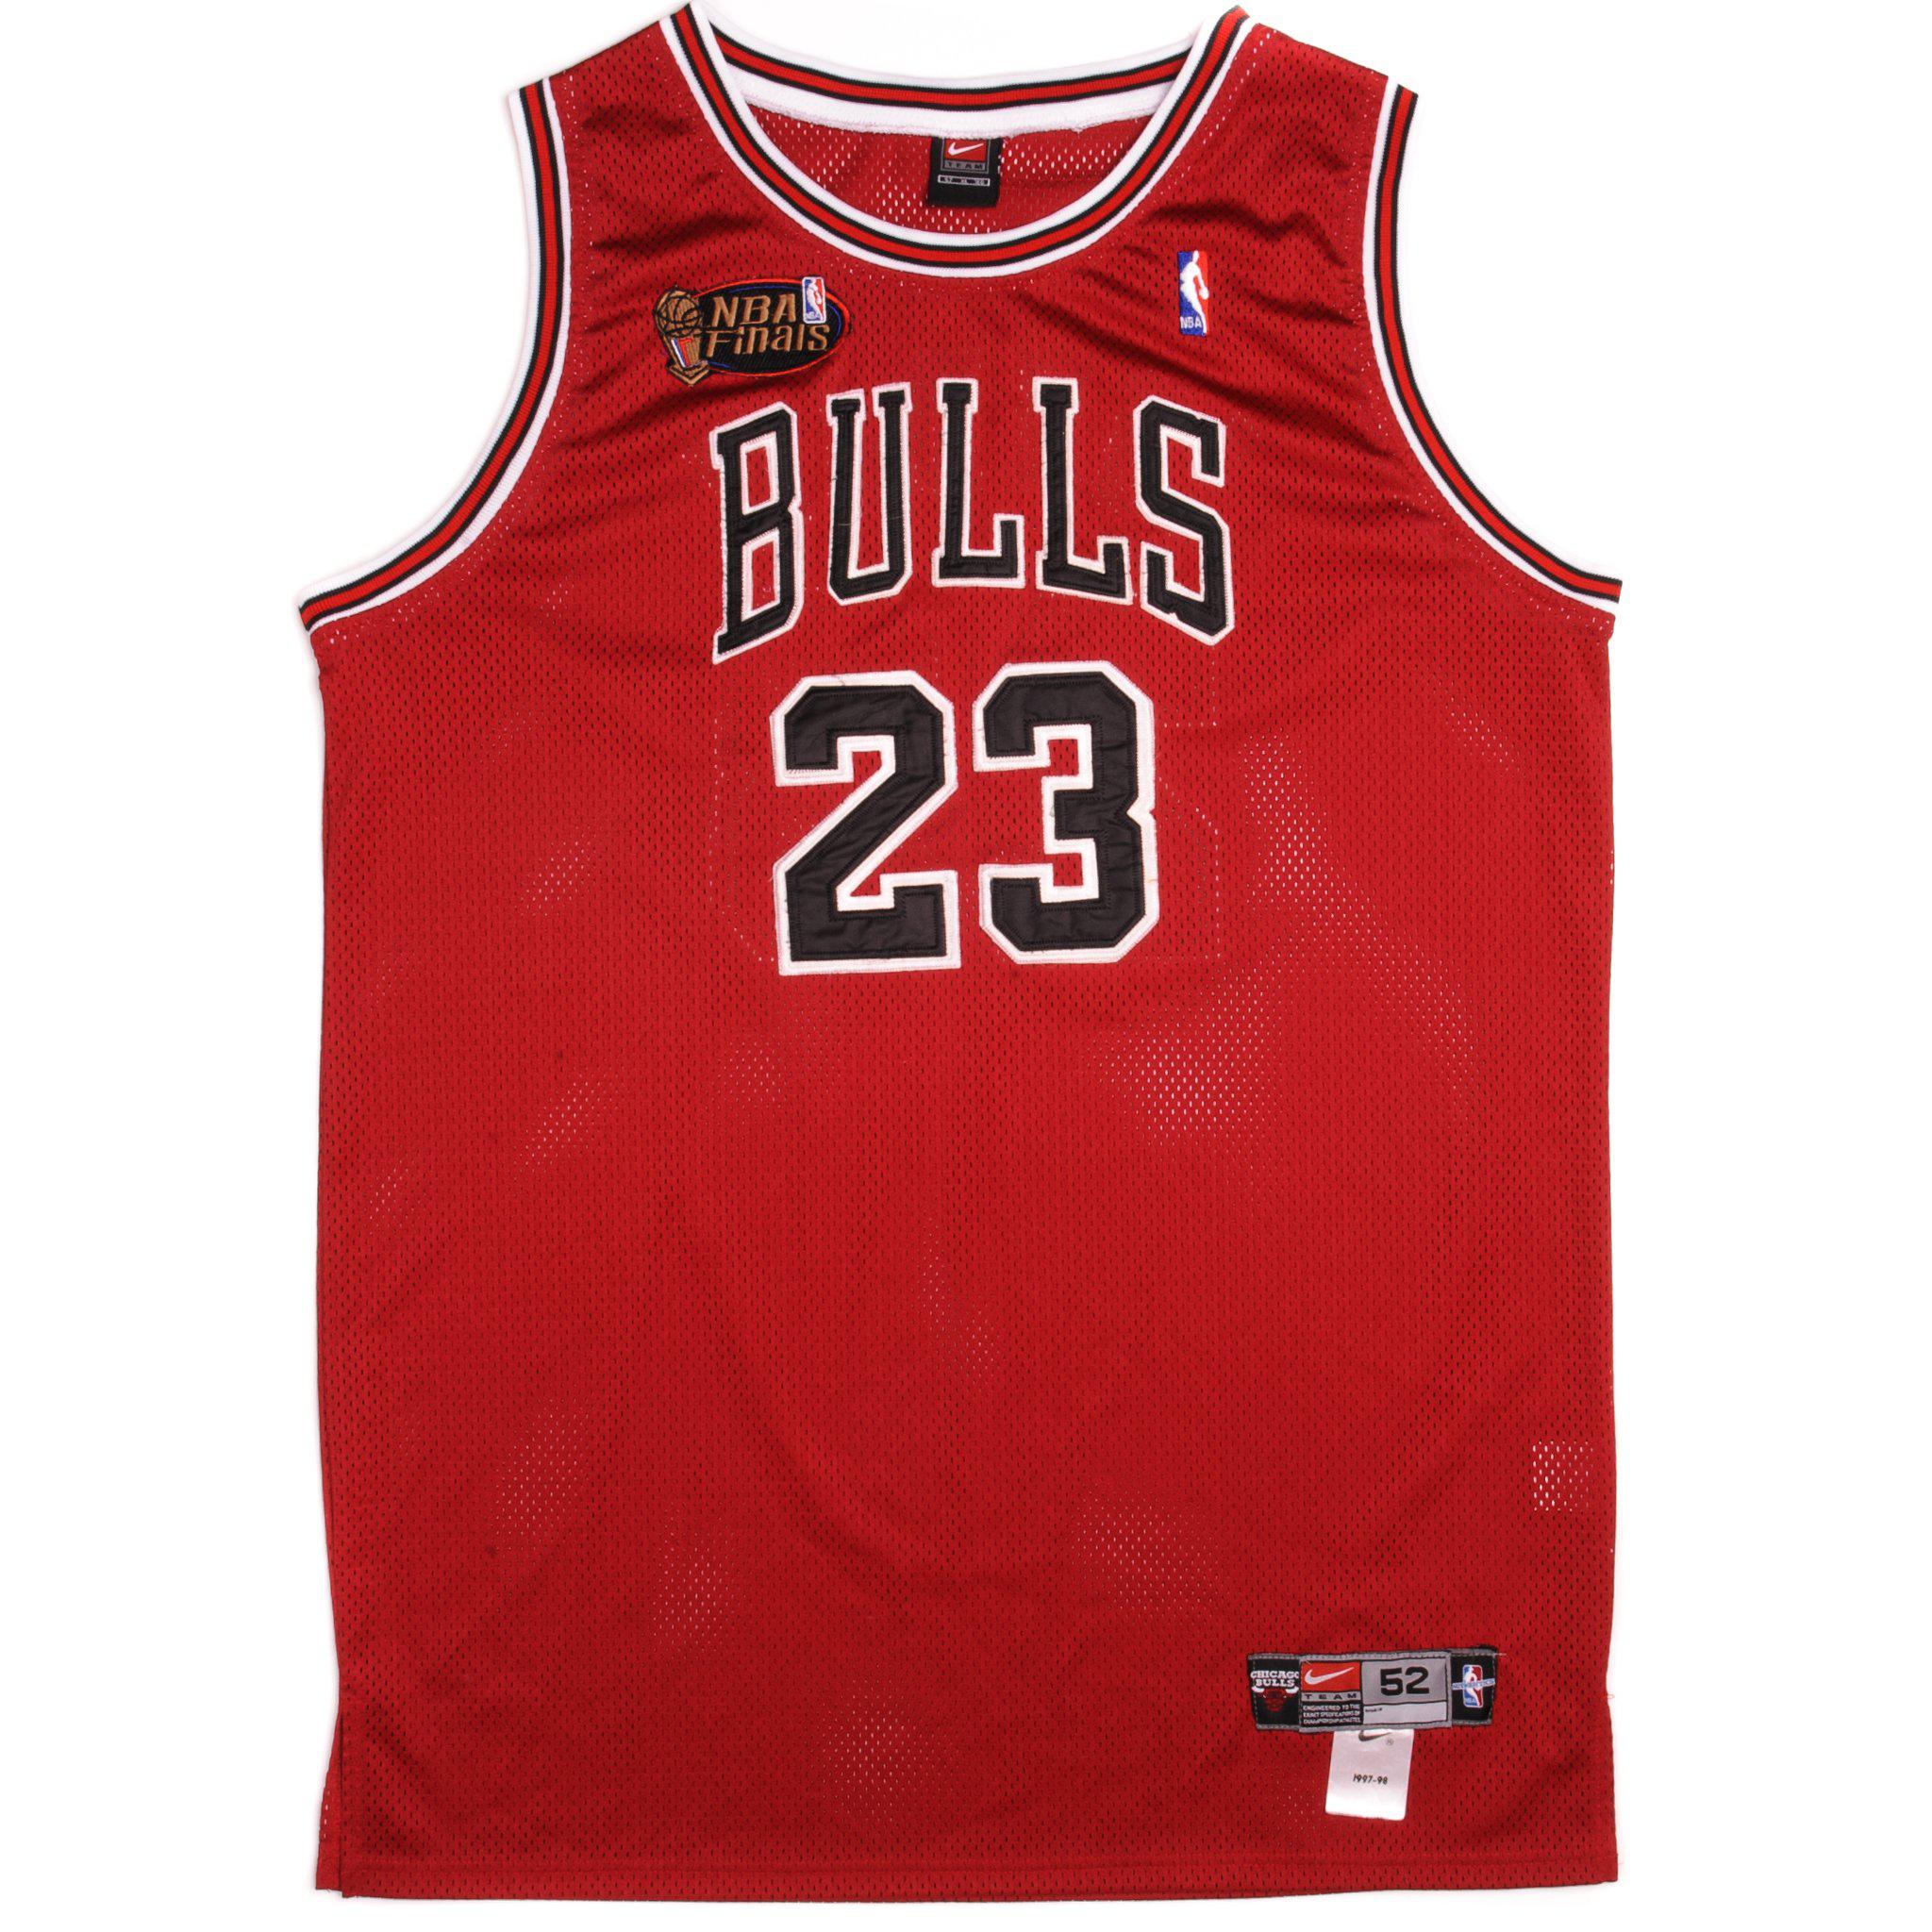 The Chicago Bulls Jersey Throwback Trend